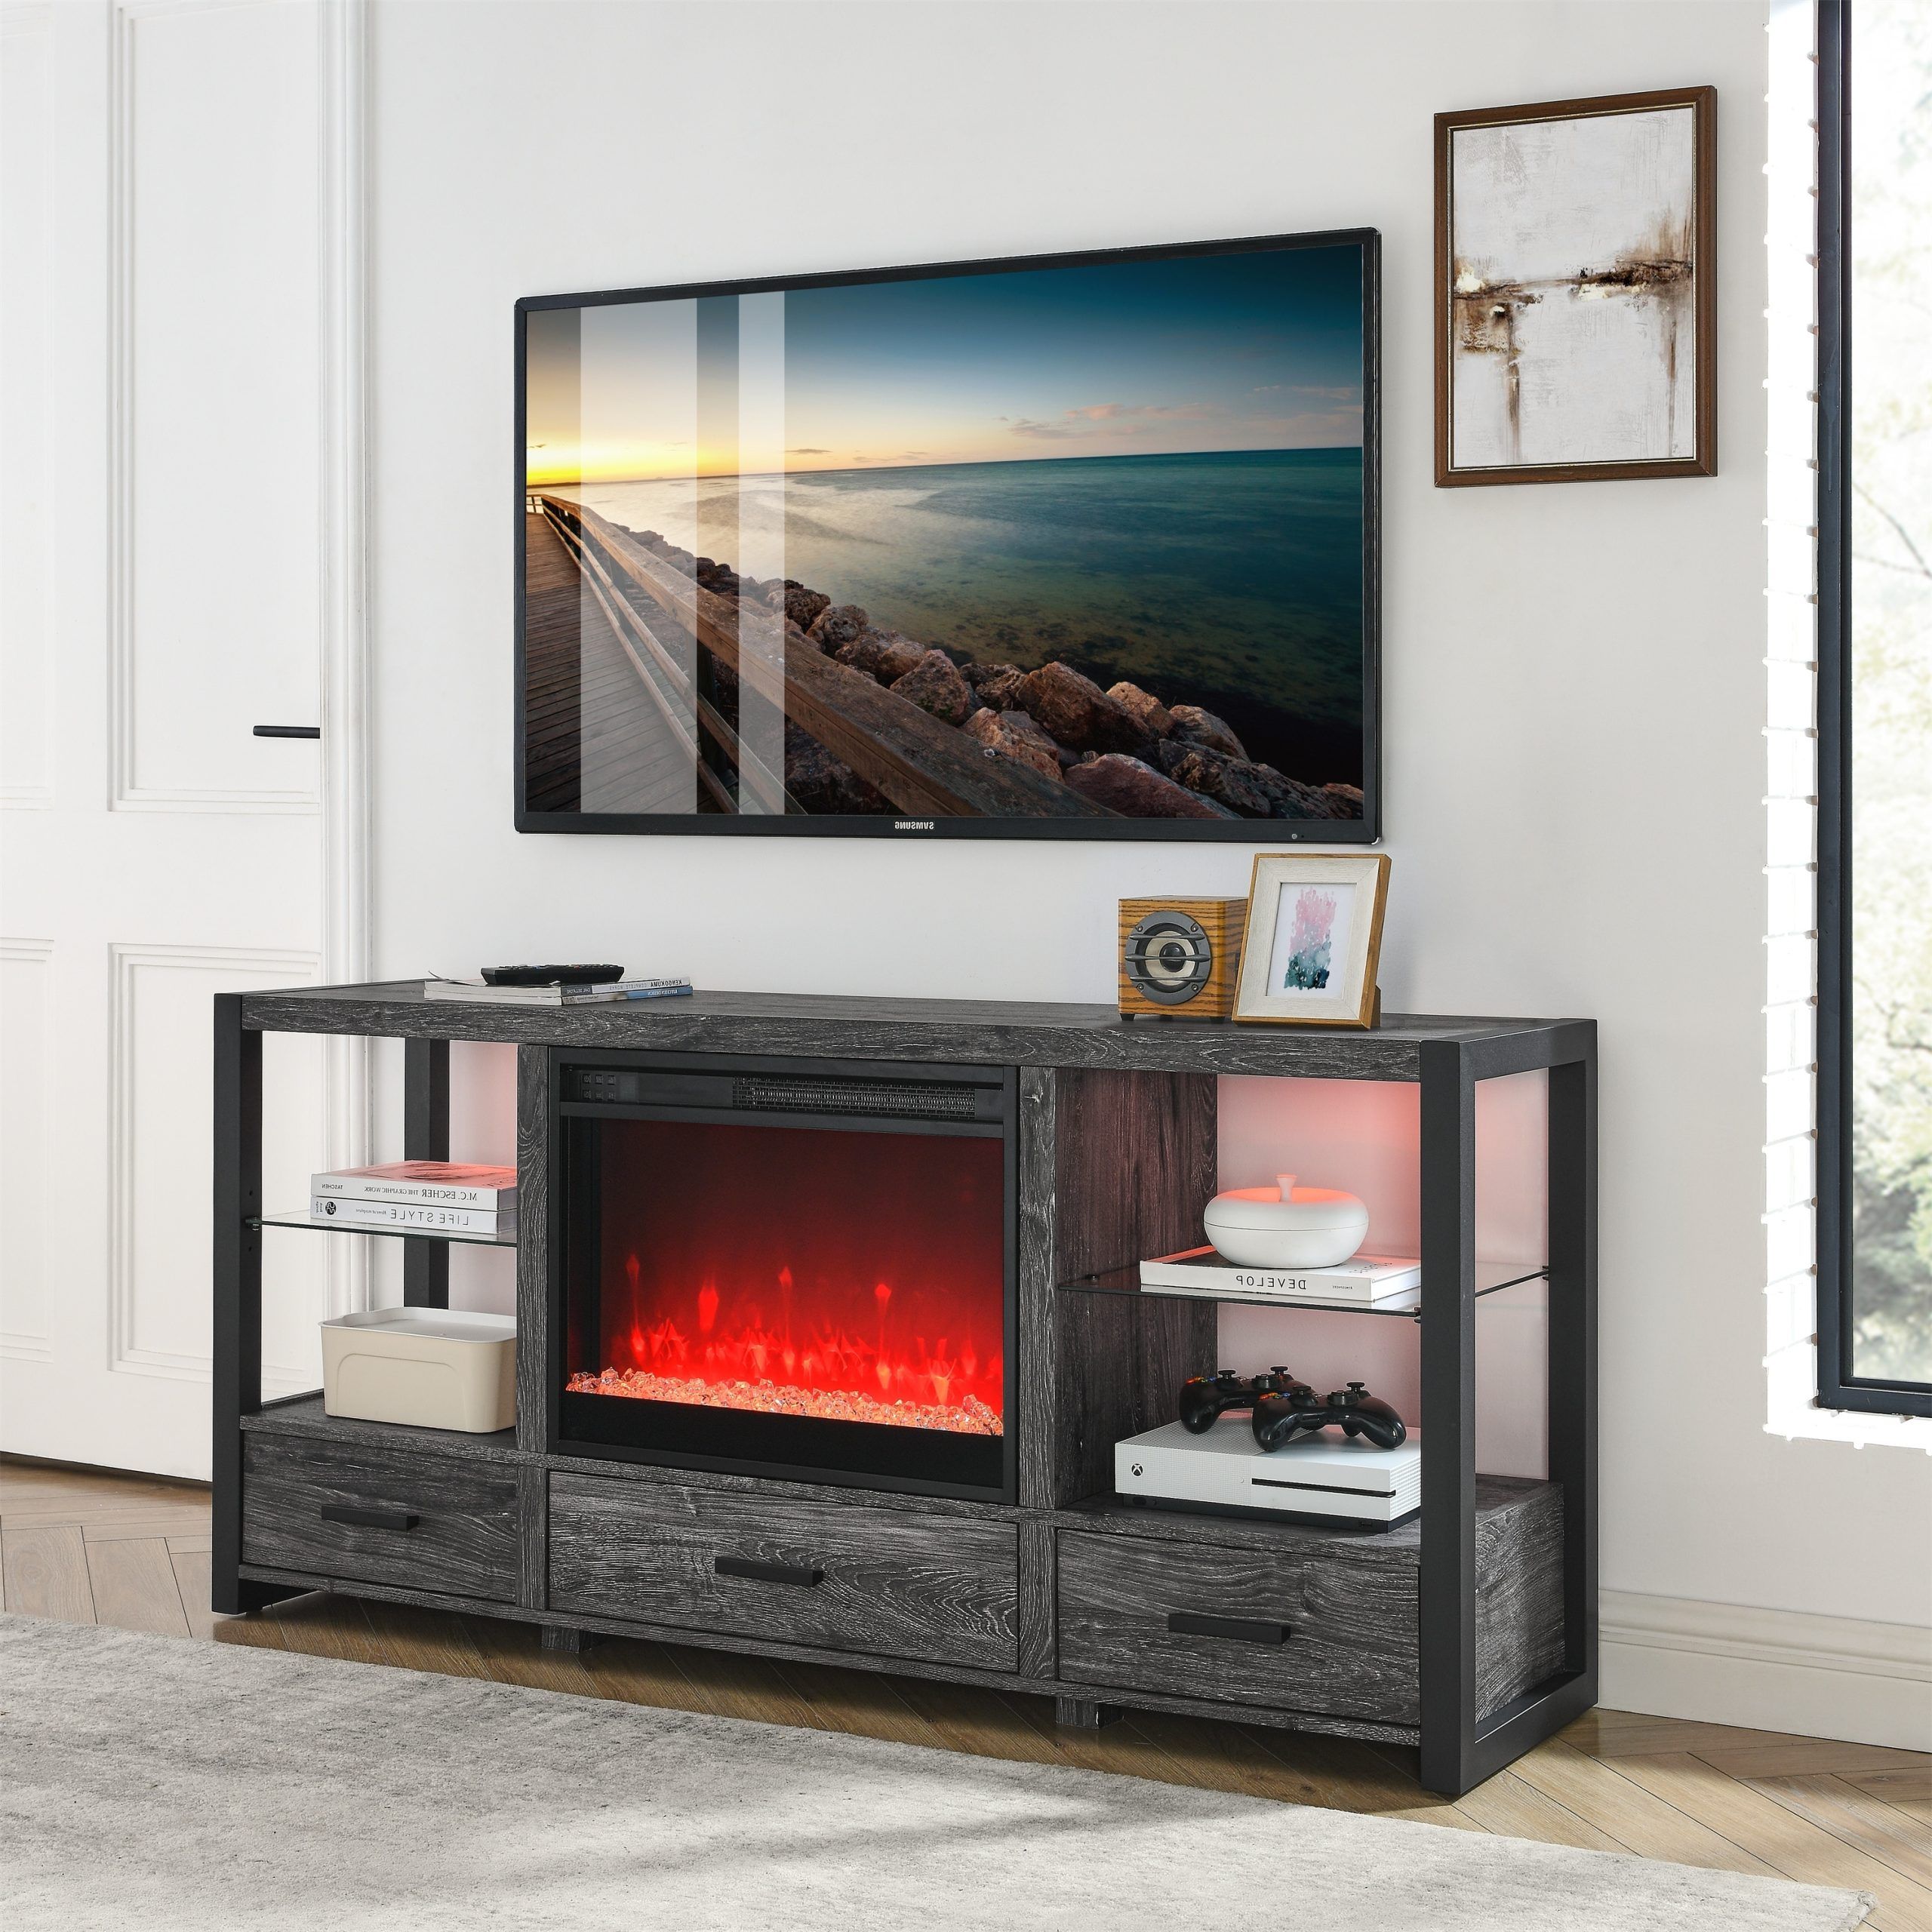 Rustic Electric Fireplace Tv Stand For Tvs Up To 70" With Multiple Storage,  Oak 28'' H X 15.7'' D X 60'' W – 60 In – Bed Bath & Beyond – 38424312 With Electric Fireplace Tv Stands (Gallery 6 of 20)